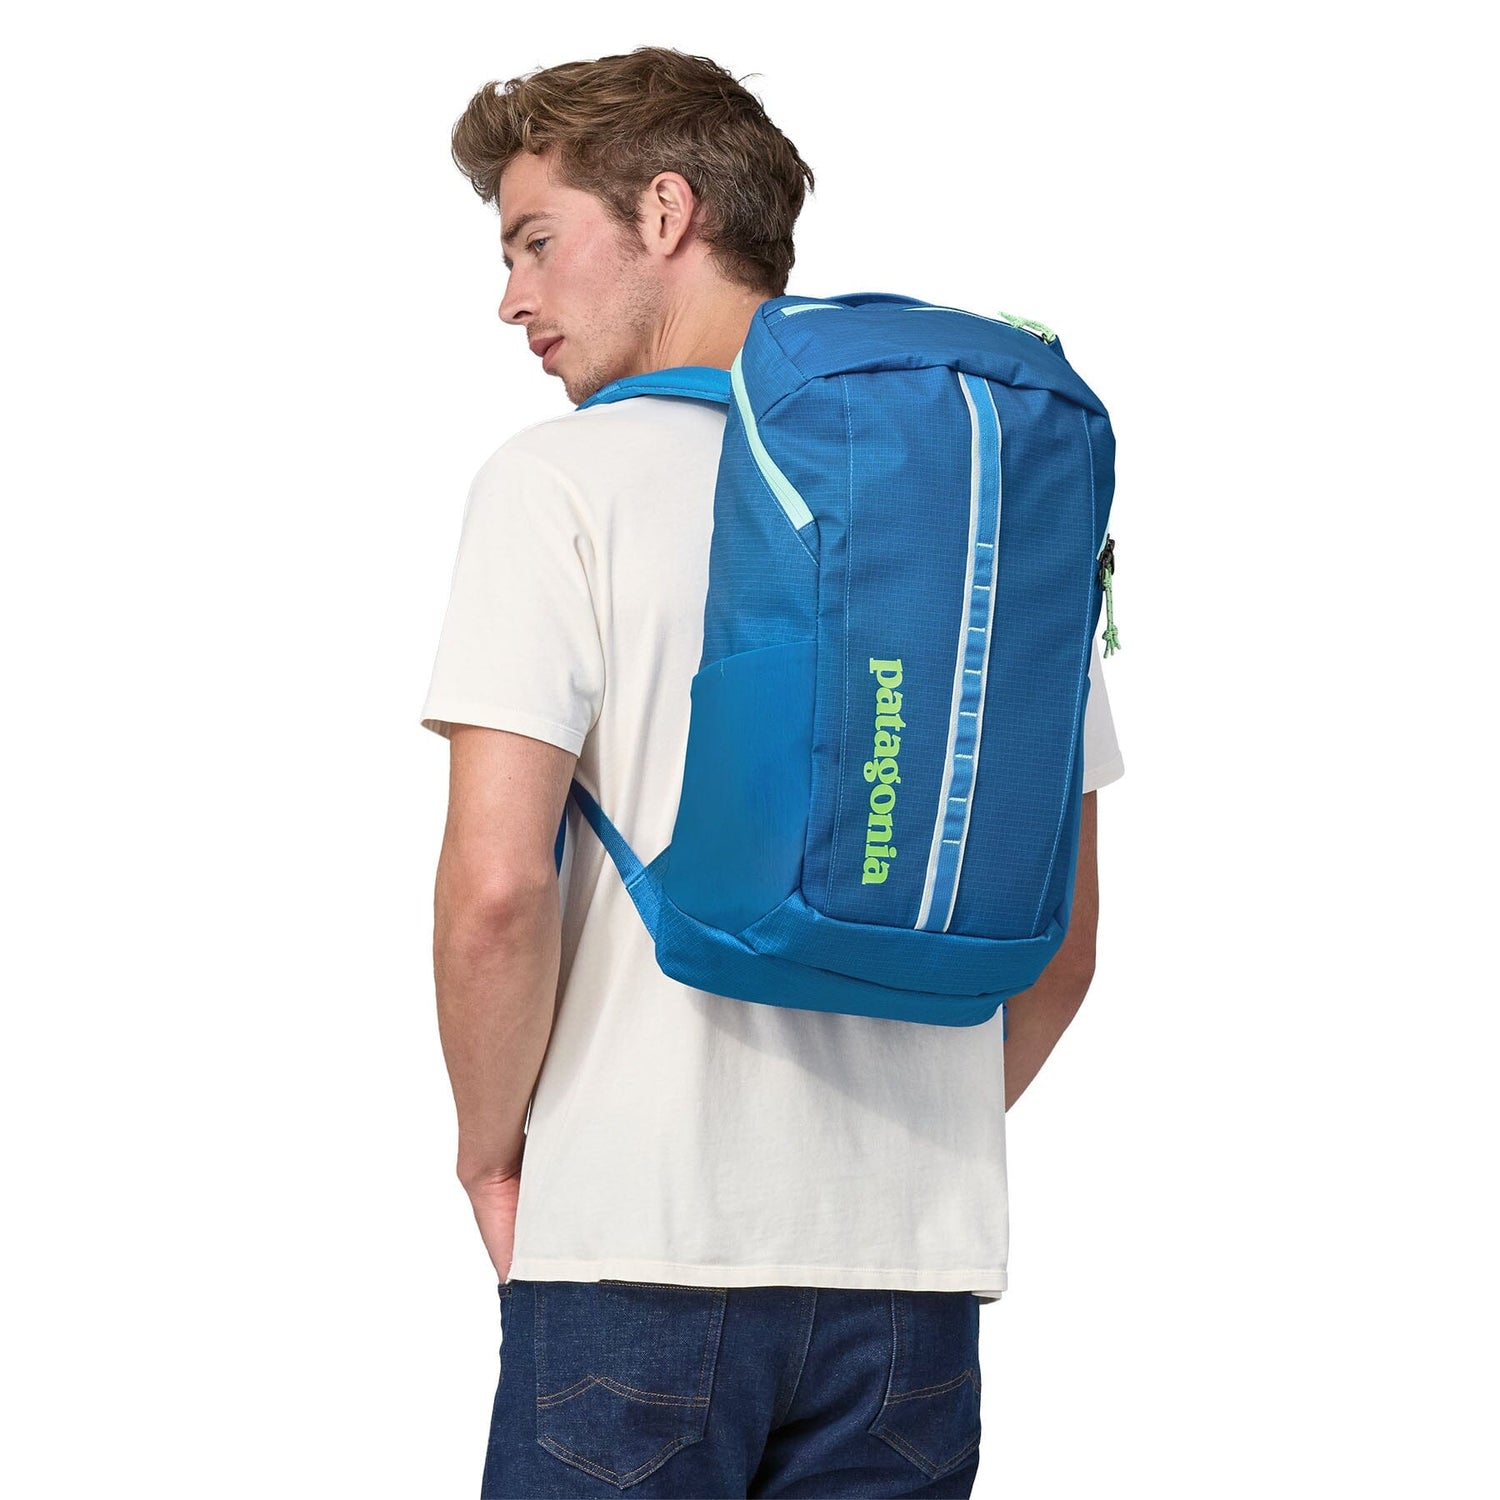 Patagonia Black Hole Pack 25L - 100% Recycled Polyester Vessel Blue Bags